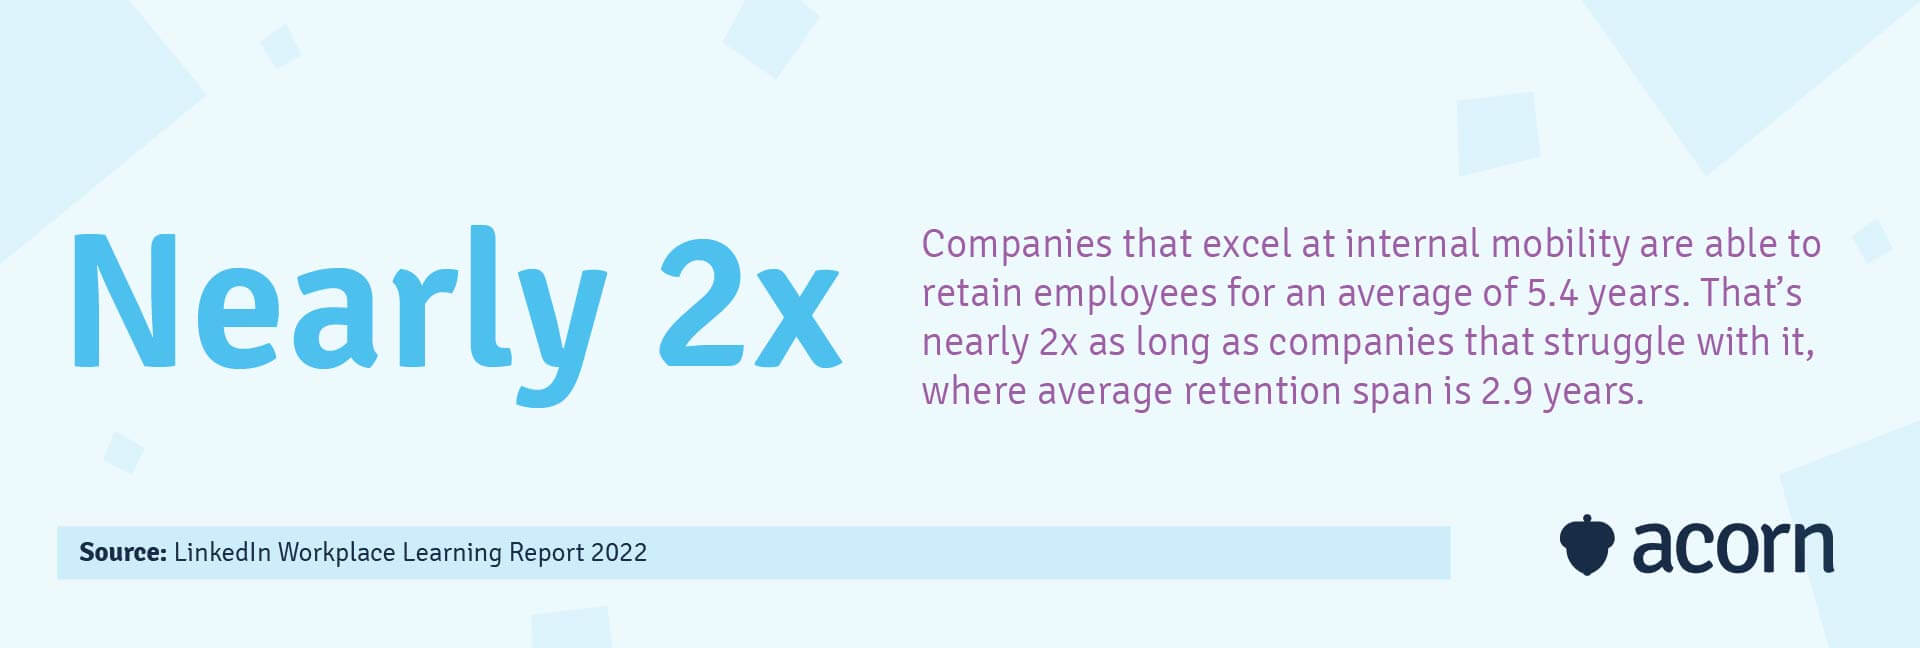 image showing that companies who excel at internal mobility are 2x more likely to retain employees